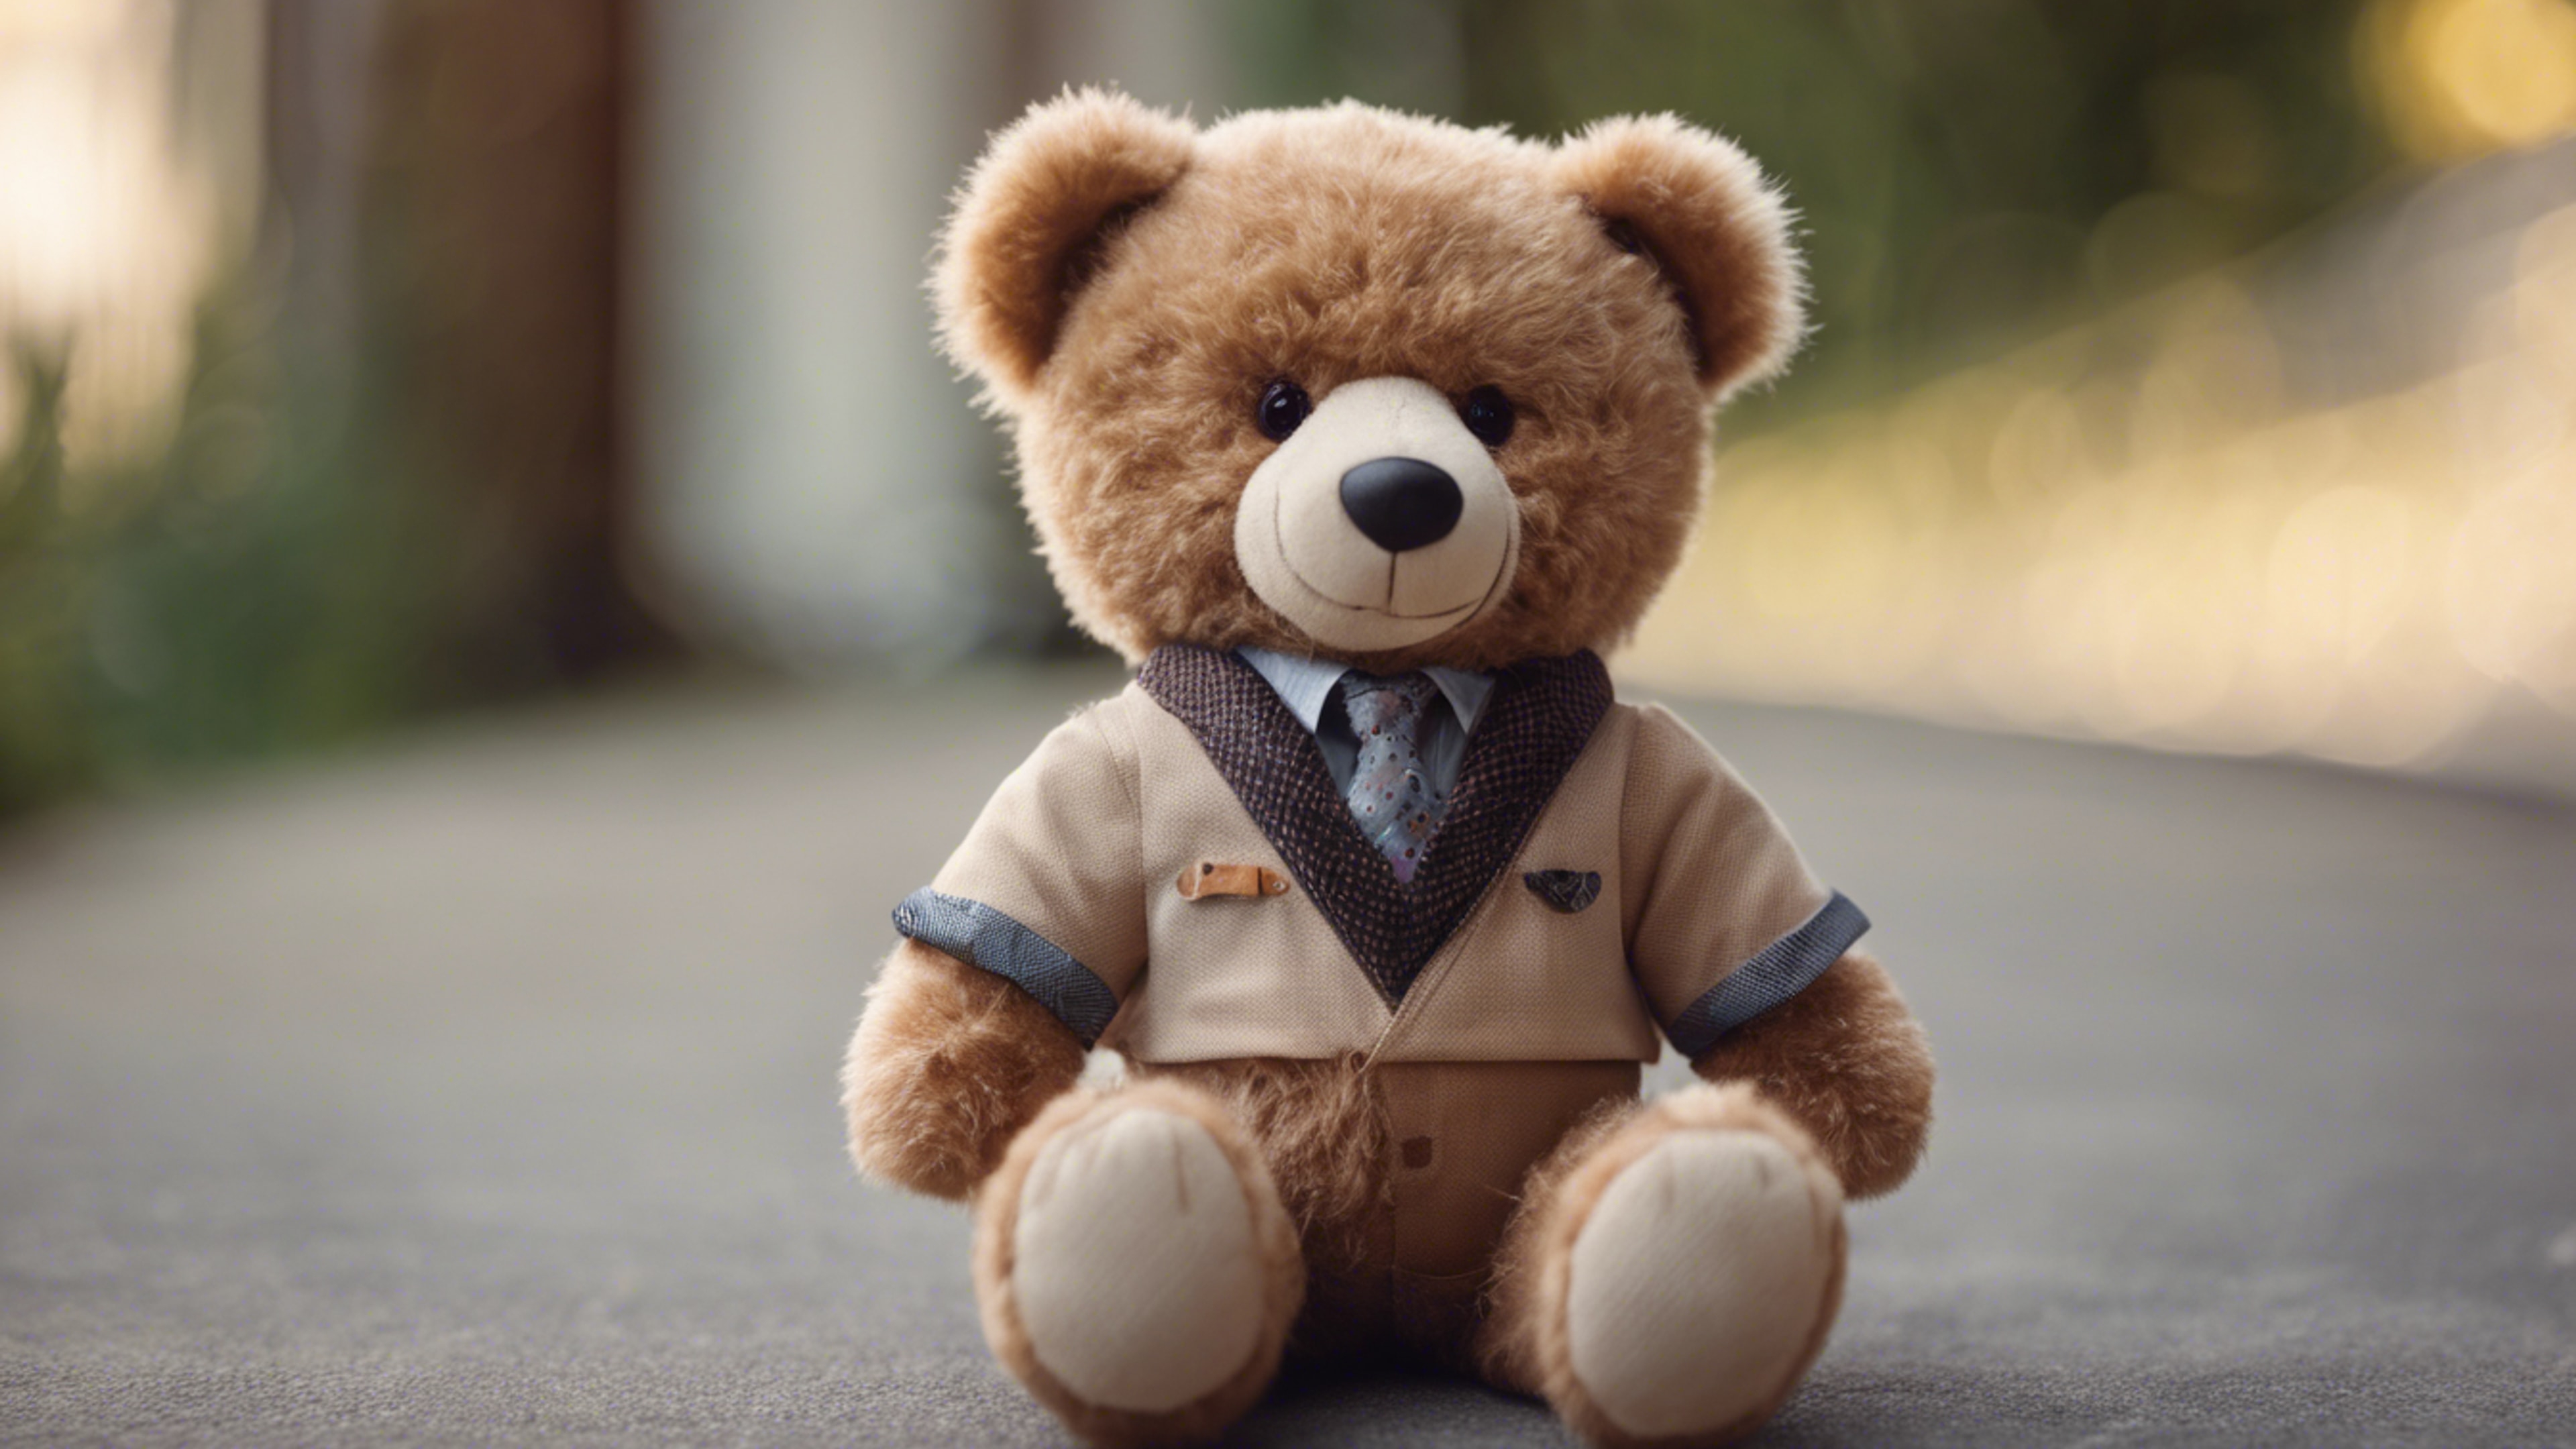 A teddy bear with light brown fur wearing a preppy outfit. Tapeta na zeď[c4dfc3c378844a52a1e6]